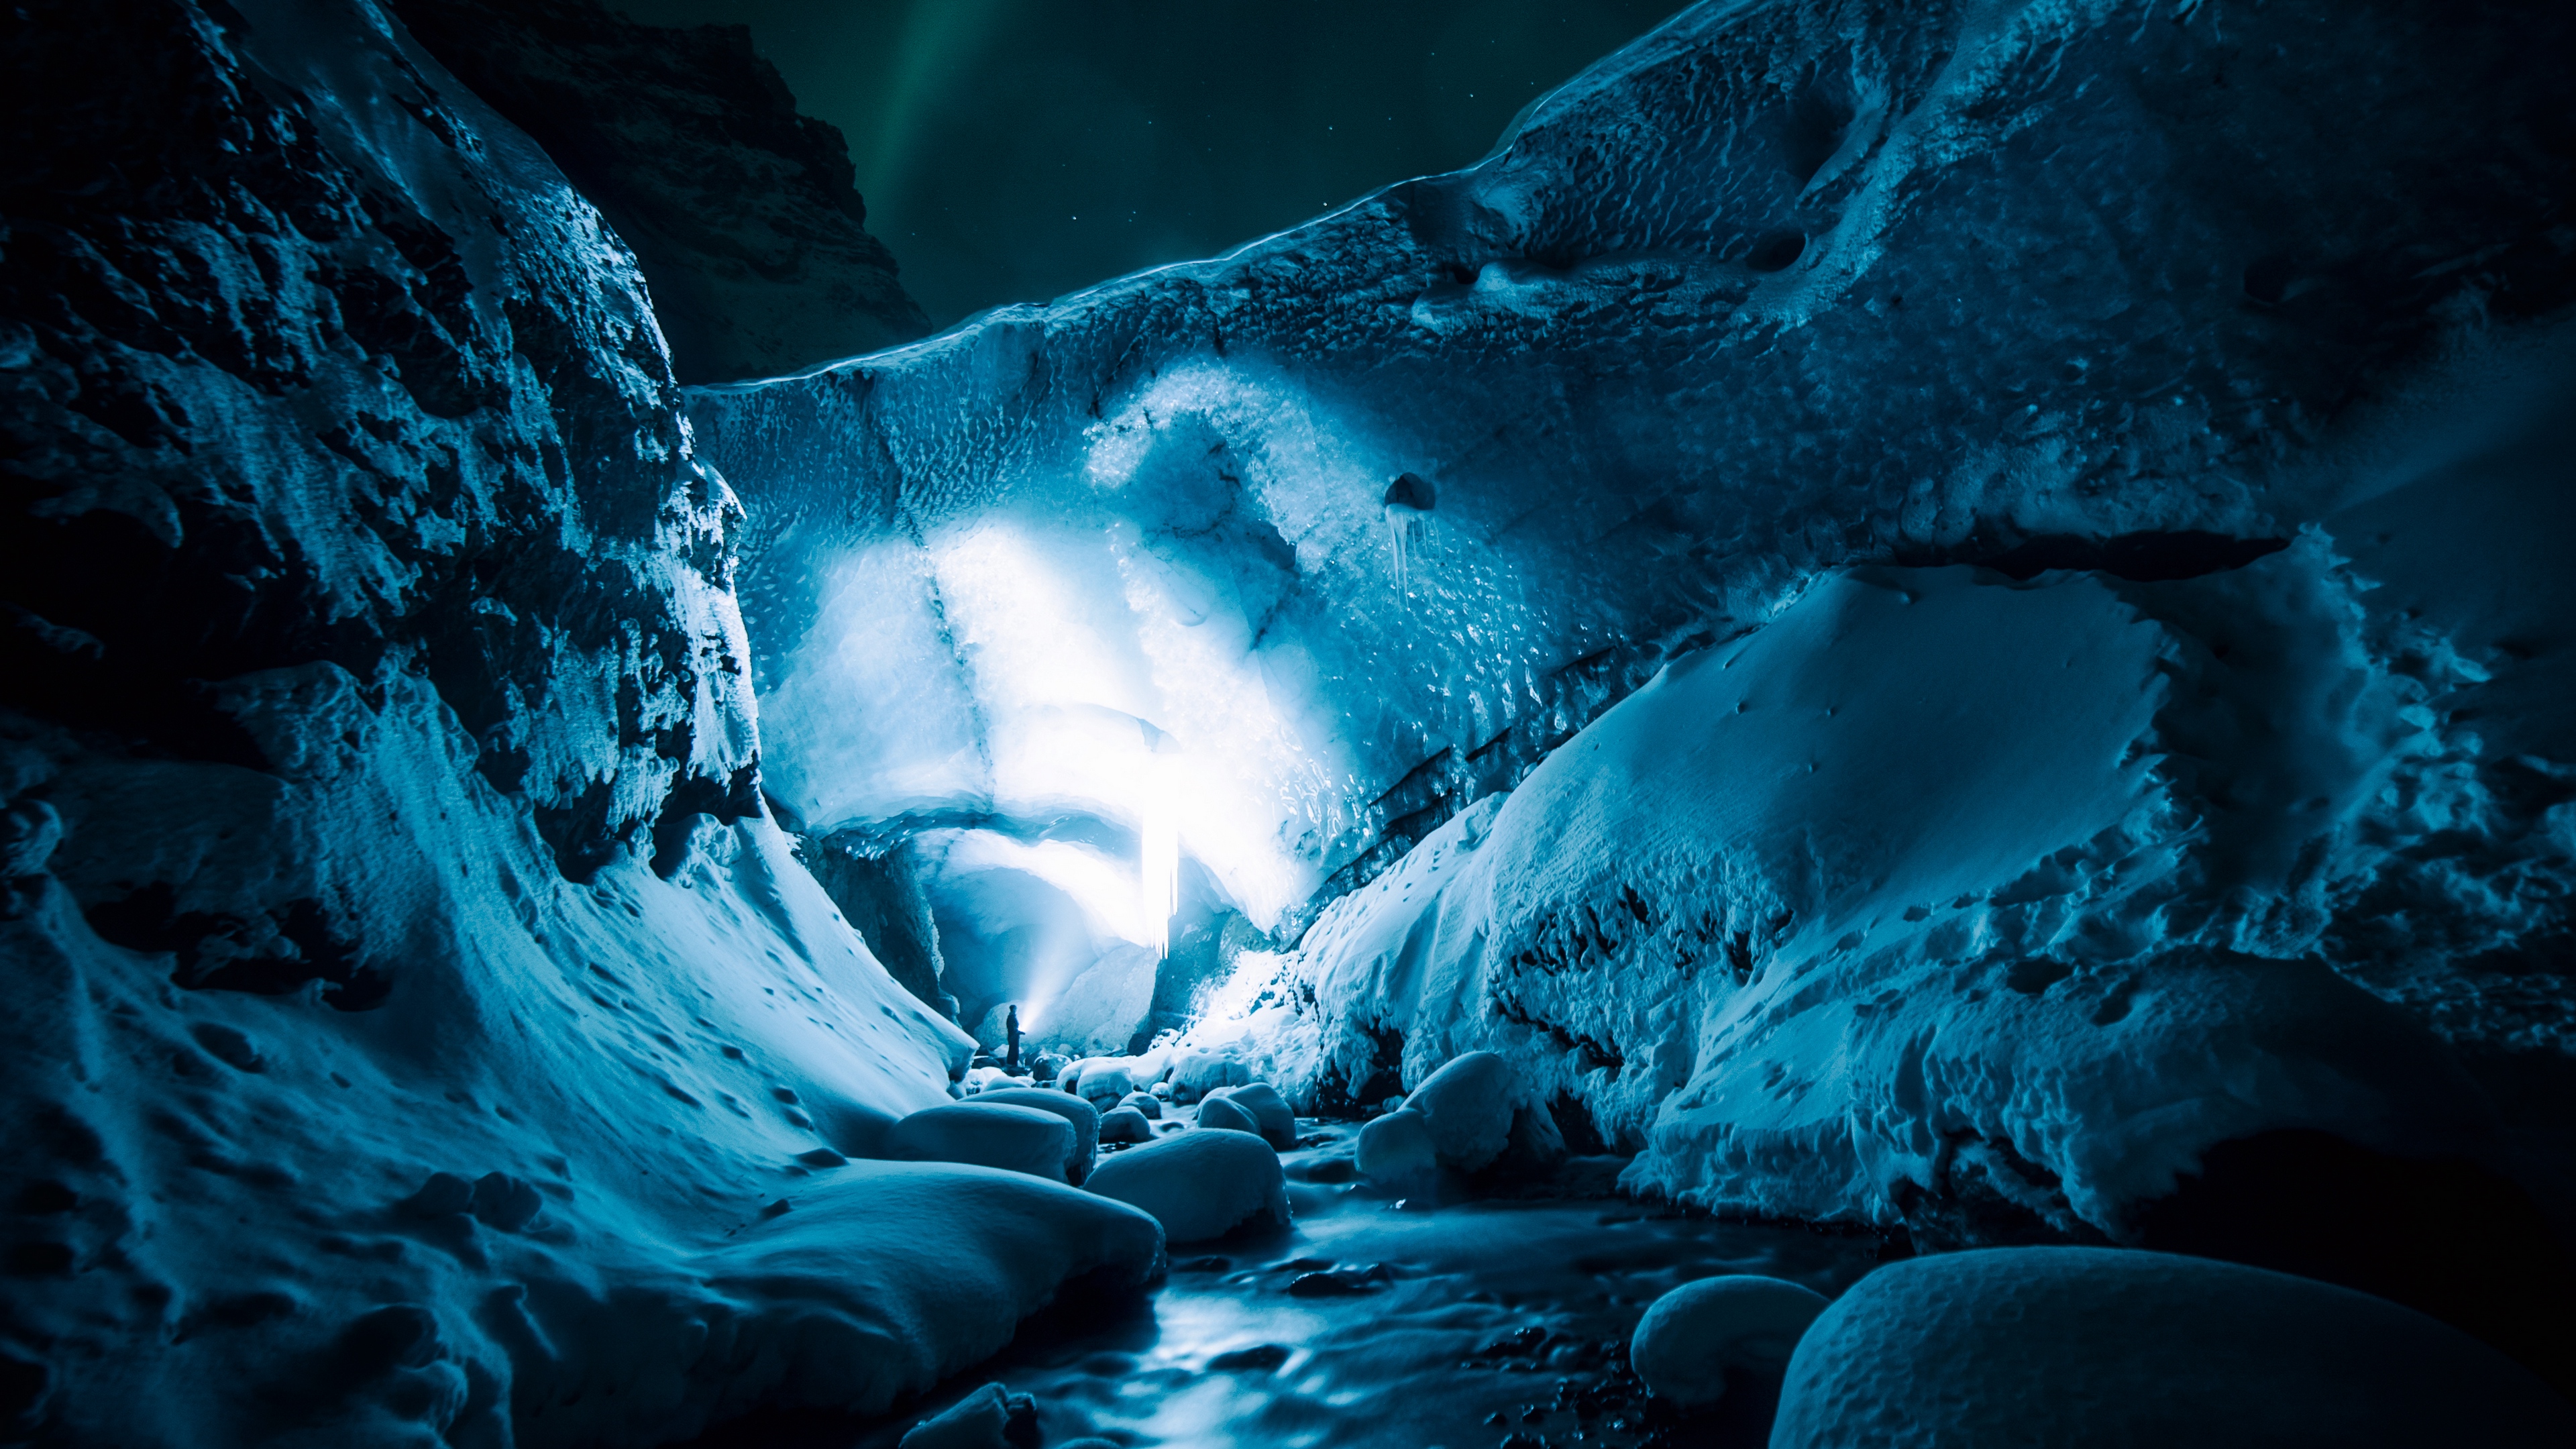 Wallpaper Ice Cave Night Ice Ice Cave Hd Wallpaper Backgrounds Download